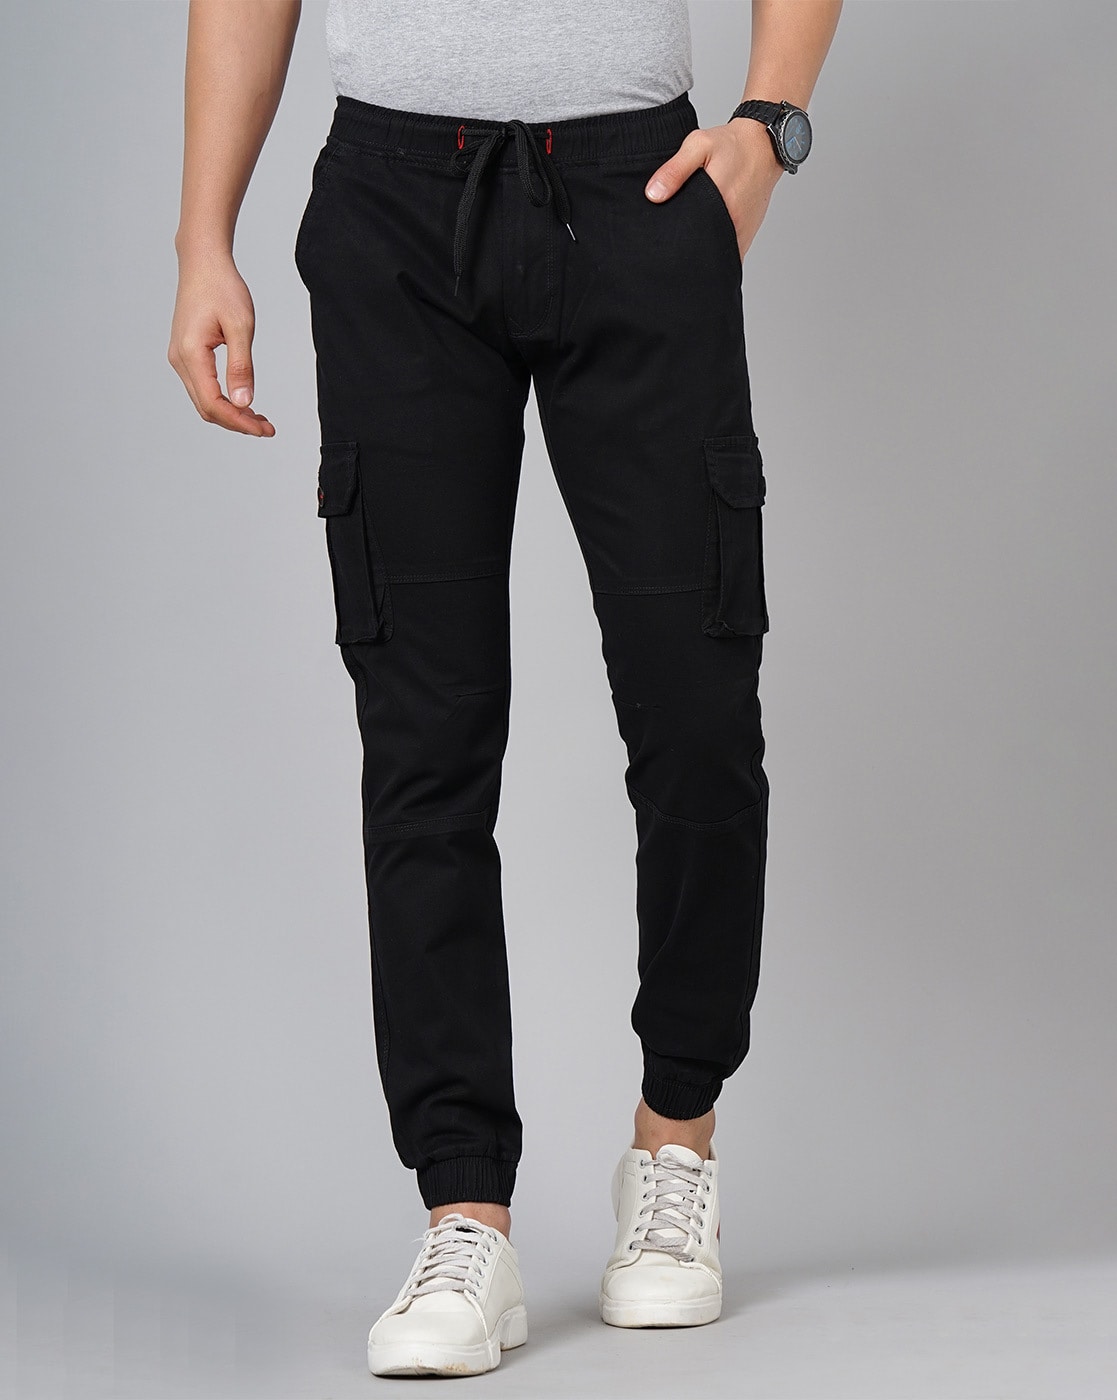 BLACK COTTON SOLID CARGO PANT  ROOKIES